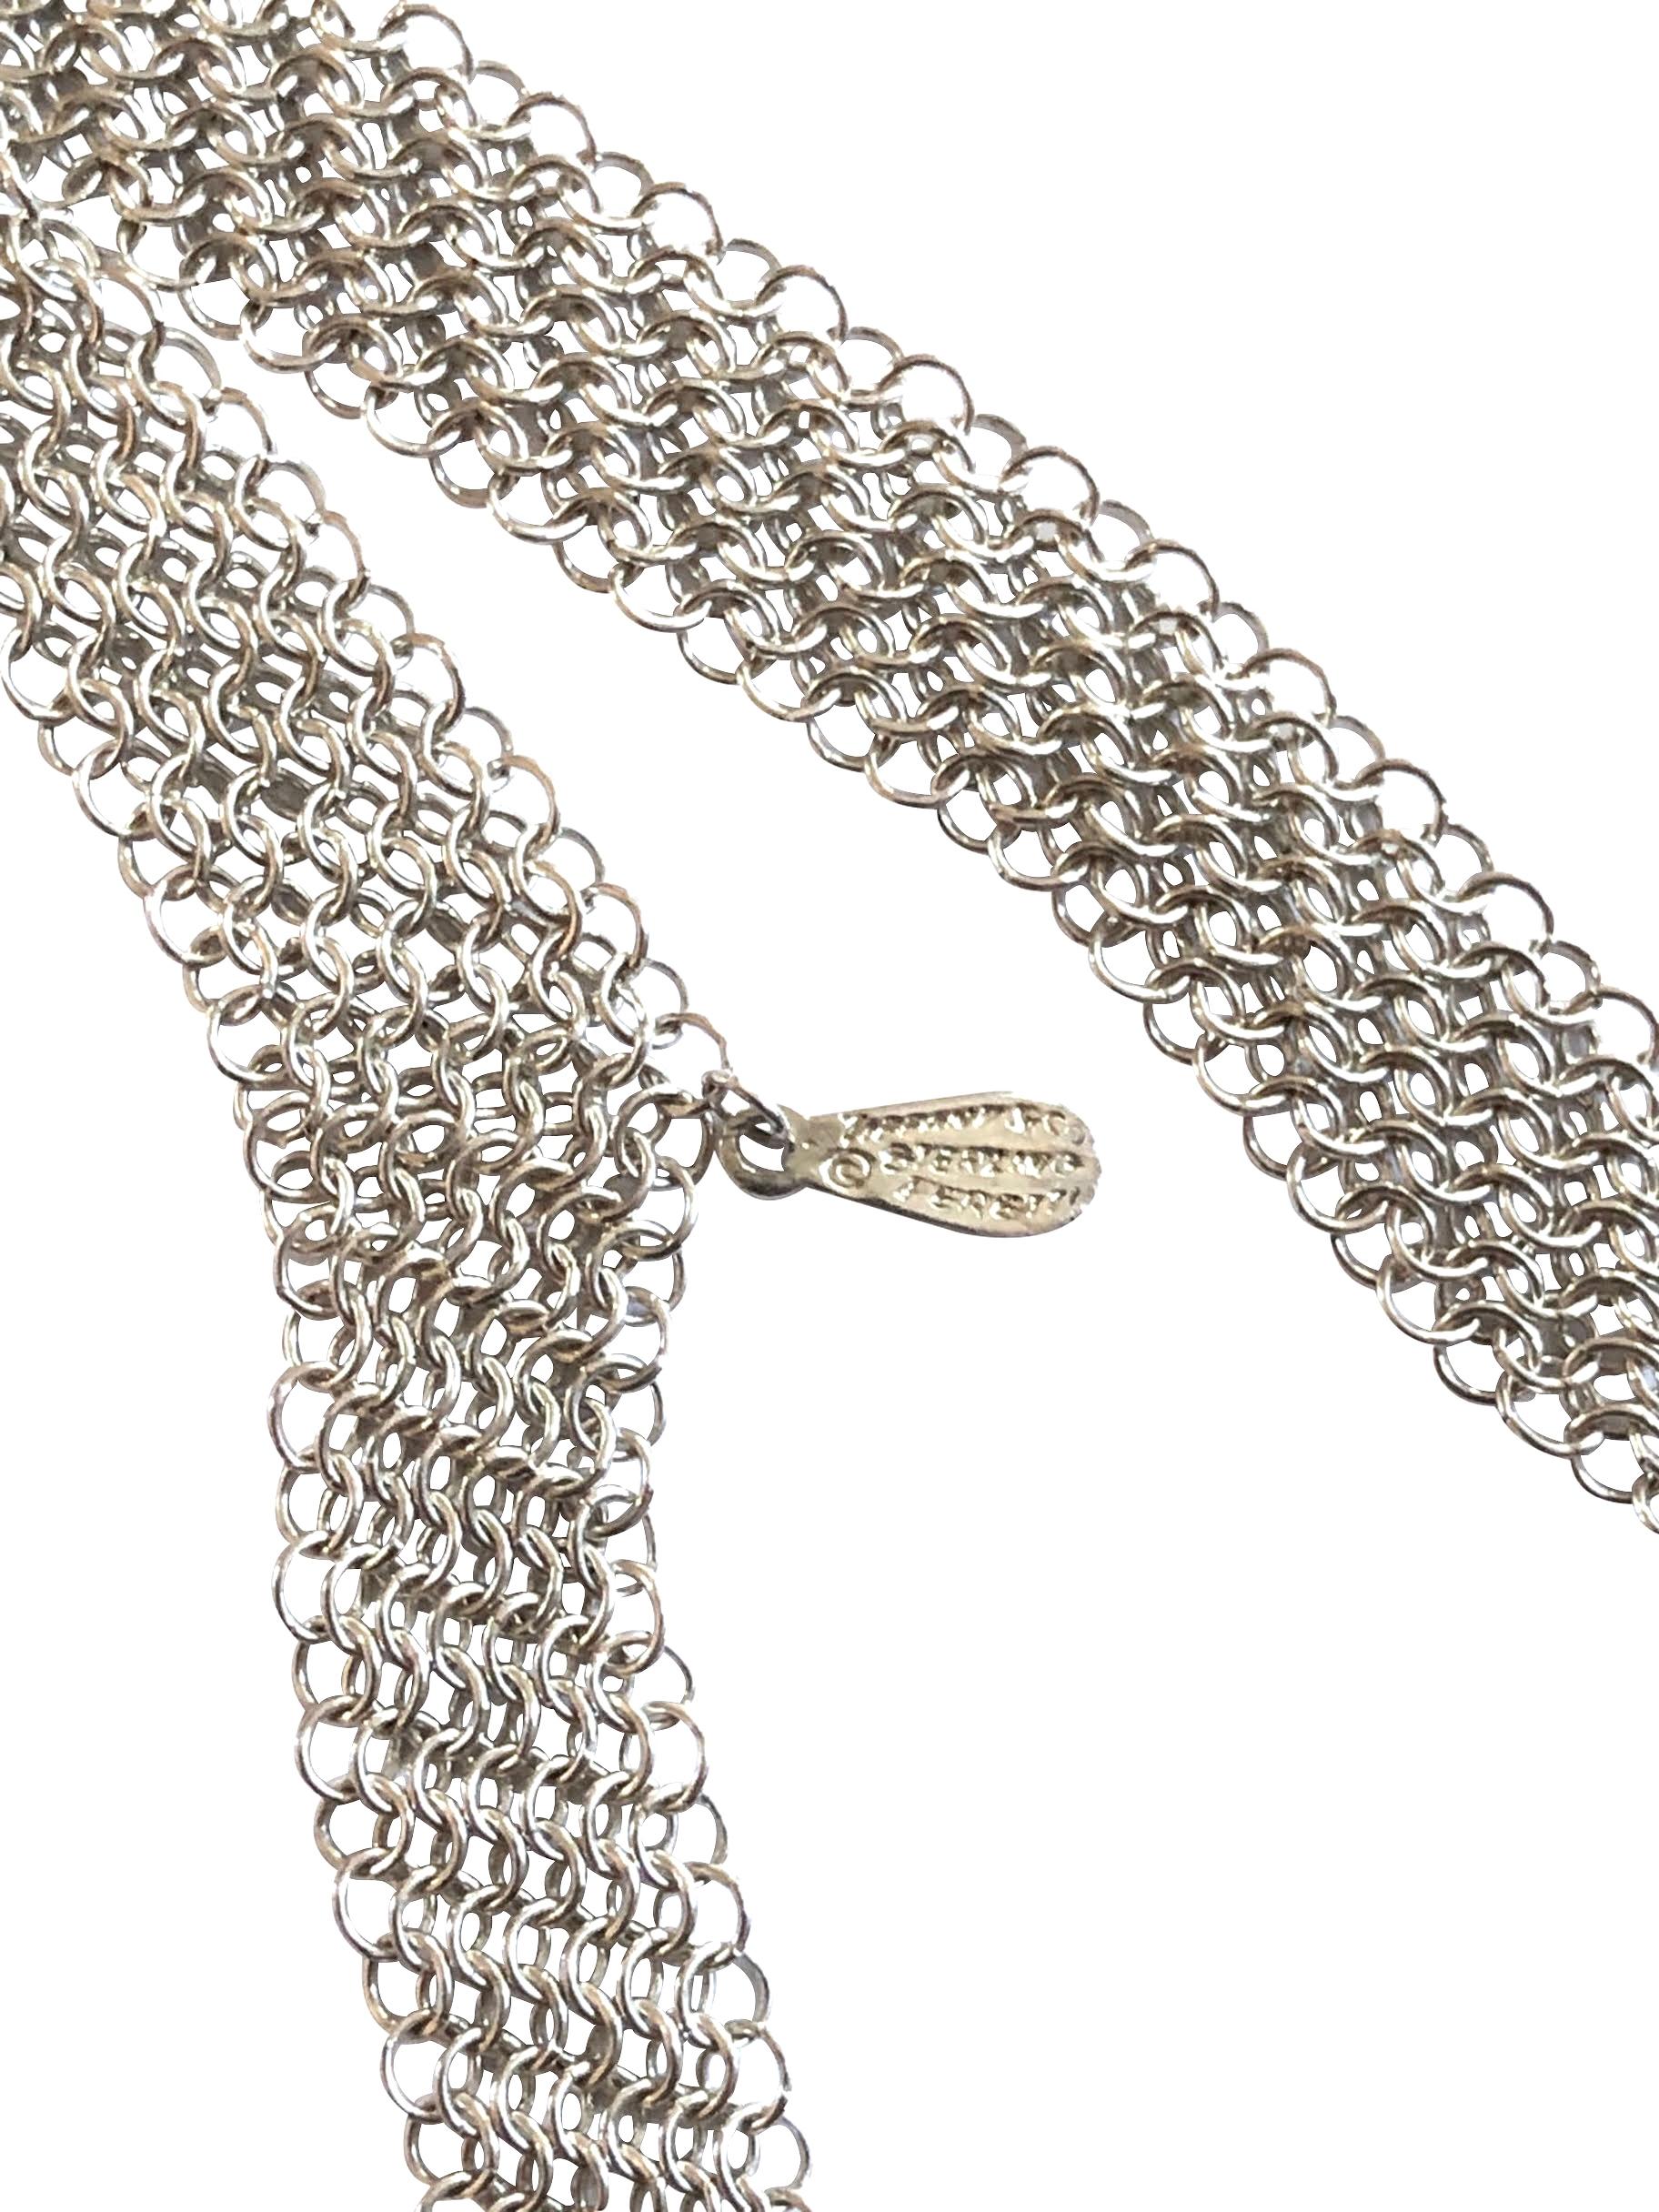 Circa 1980s Elsa Peretti for Tiffany & Company Sterling Silver link Mesh Bib wrap around Necklace, measuring 26 inches in length and 1 3/4 inches wide at the center. Excellent condition and comes in a Tiffany suede pouch.